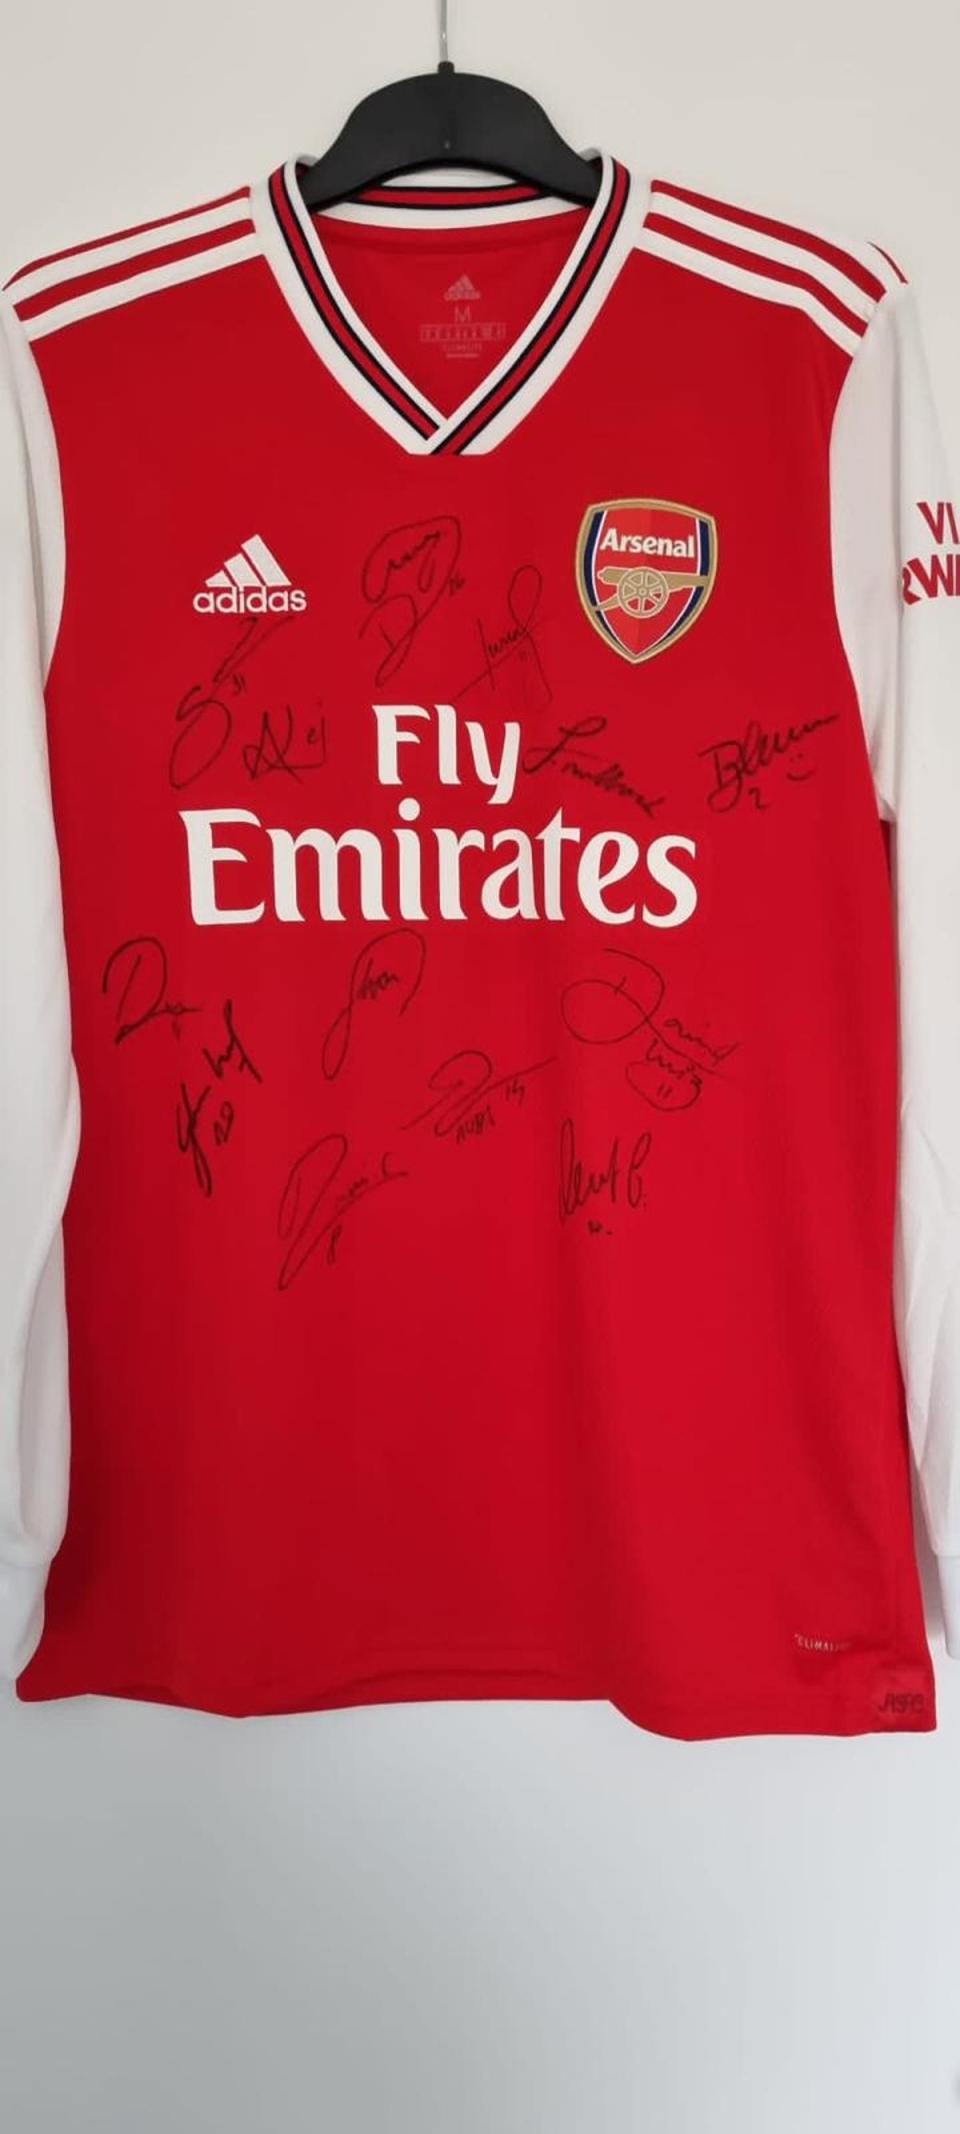 An Arsenal shirt signed by the men’s first team gifted to Mr Cain wishing him a good recovery (Supplied)